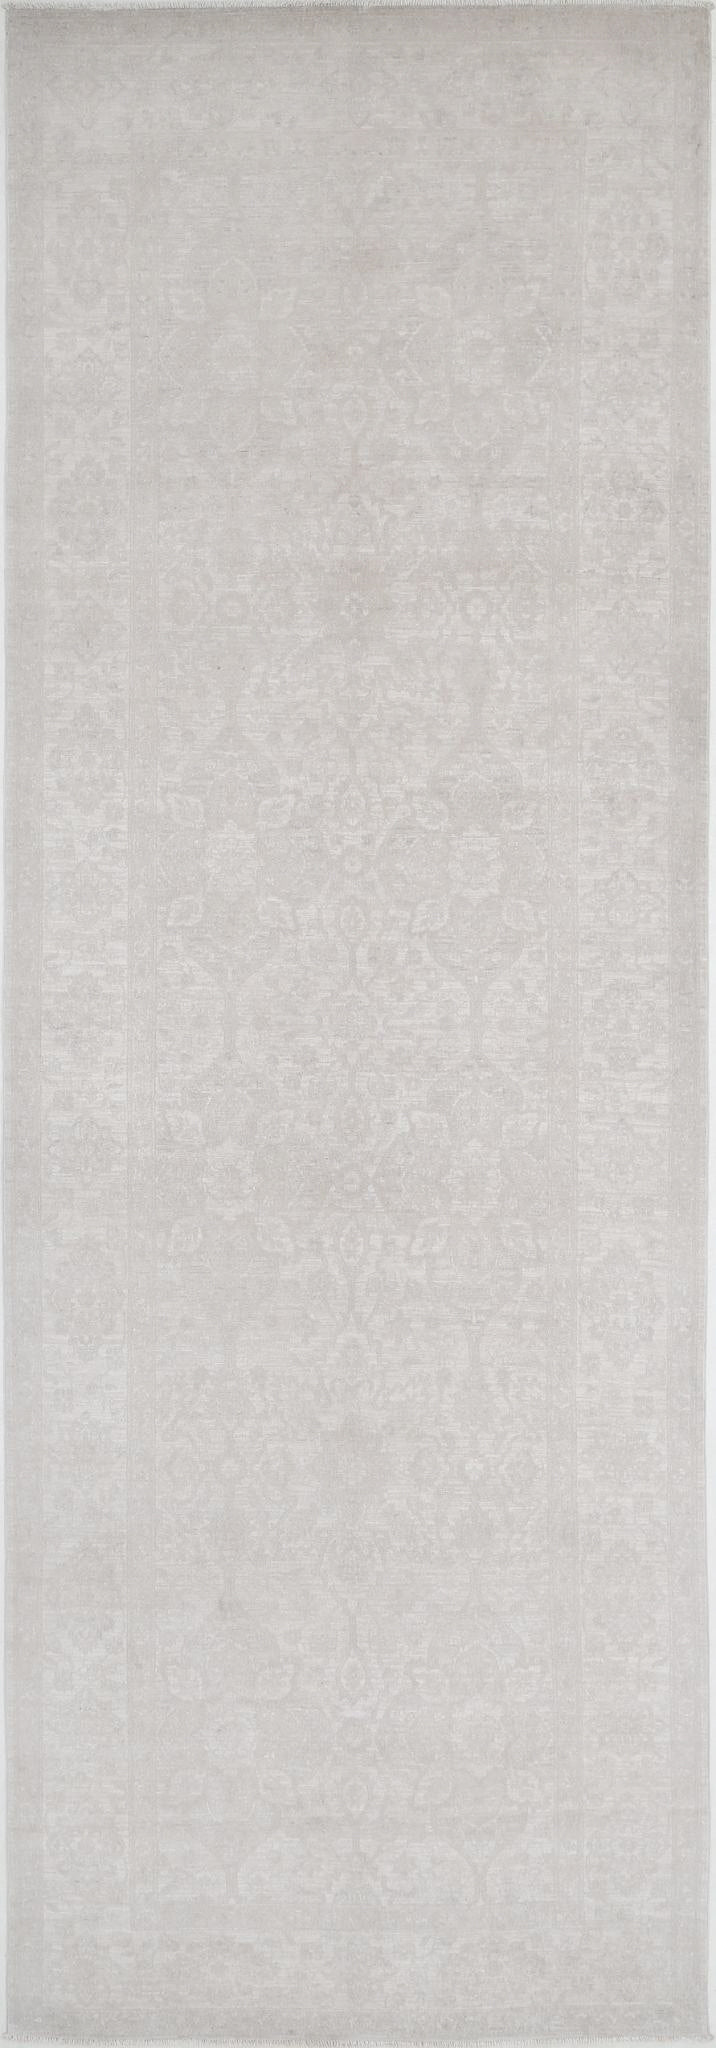 Serenity-hand-knotted-tabriz-wool-rug-5017652